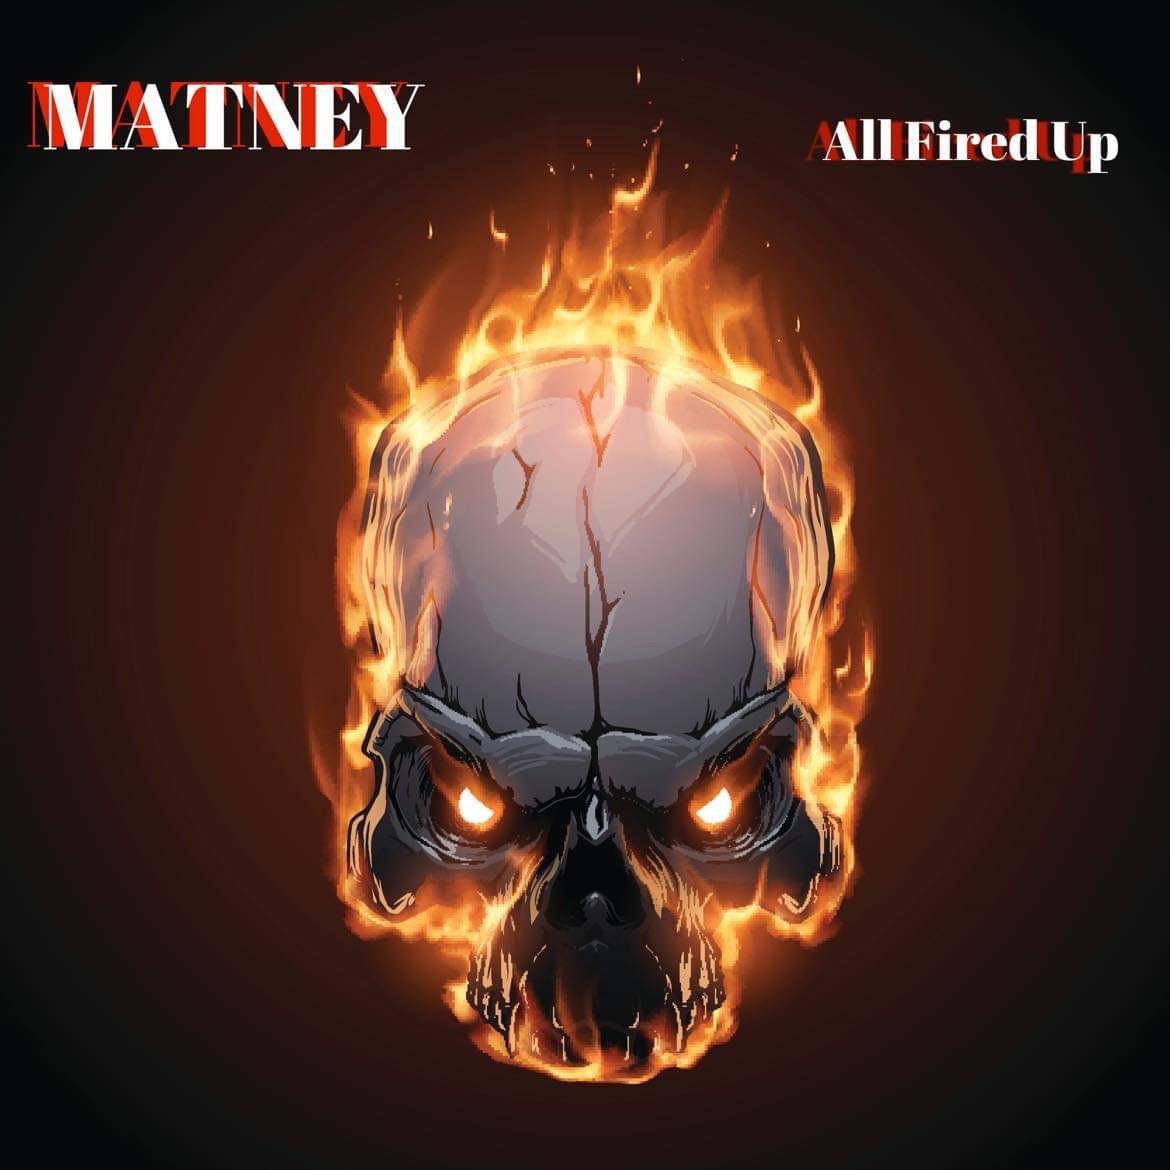 LISTEN: “All Fired Up” by Matney